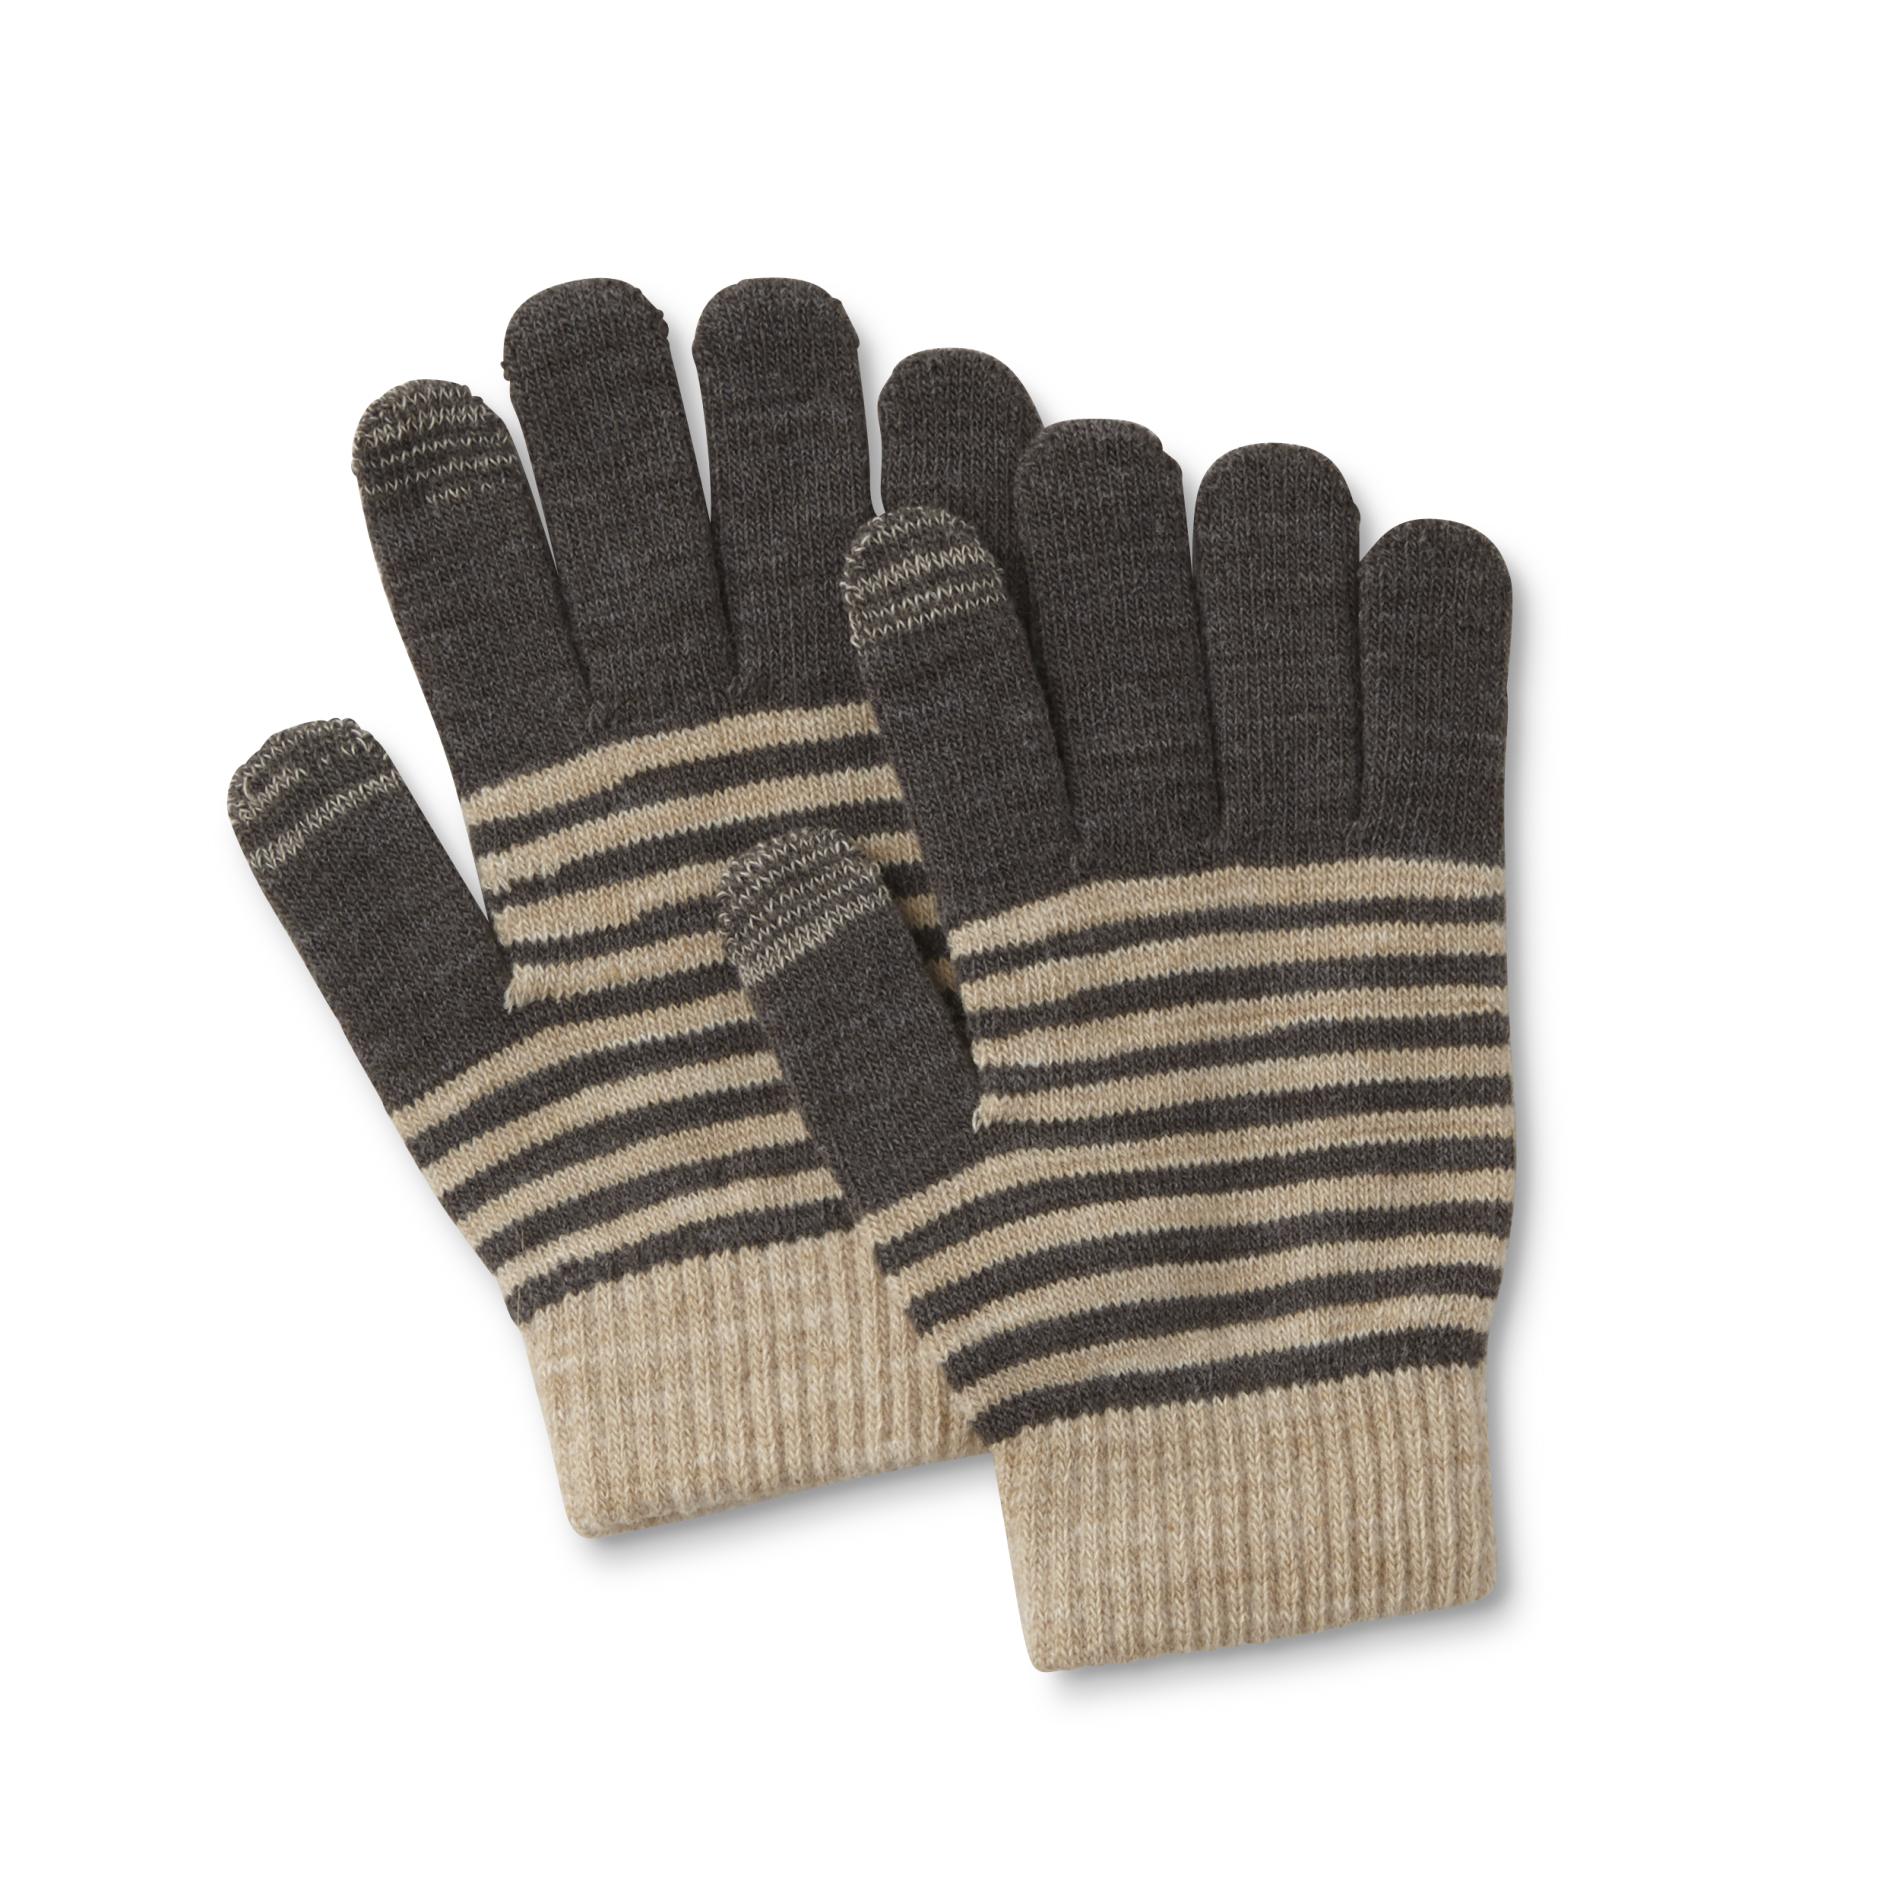 Women's Texting Gloves - Striped